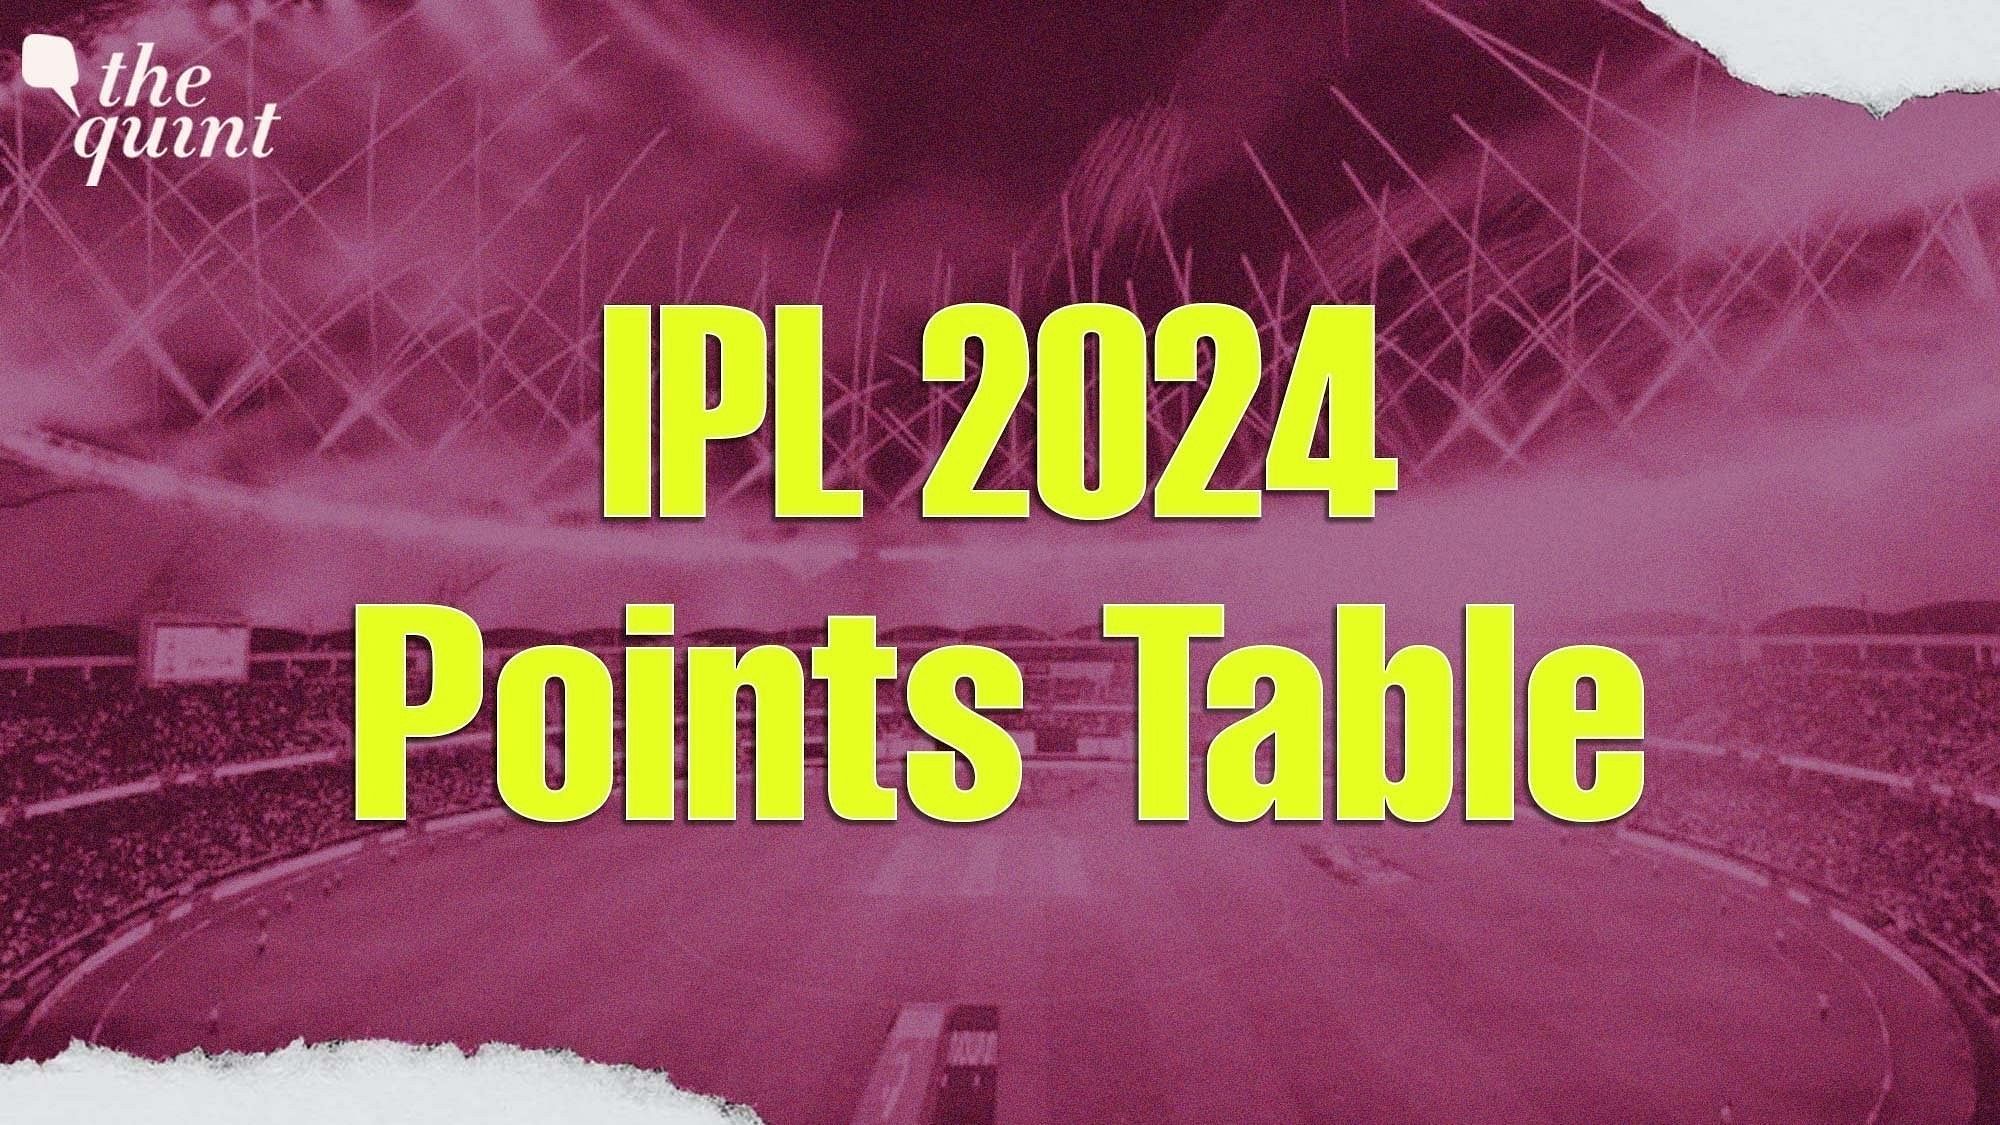 <div class="paragraphs"><p>IPL 2024 Points Table: Check the top teams after the RCB vs SRH match today.</p></div>